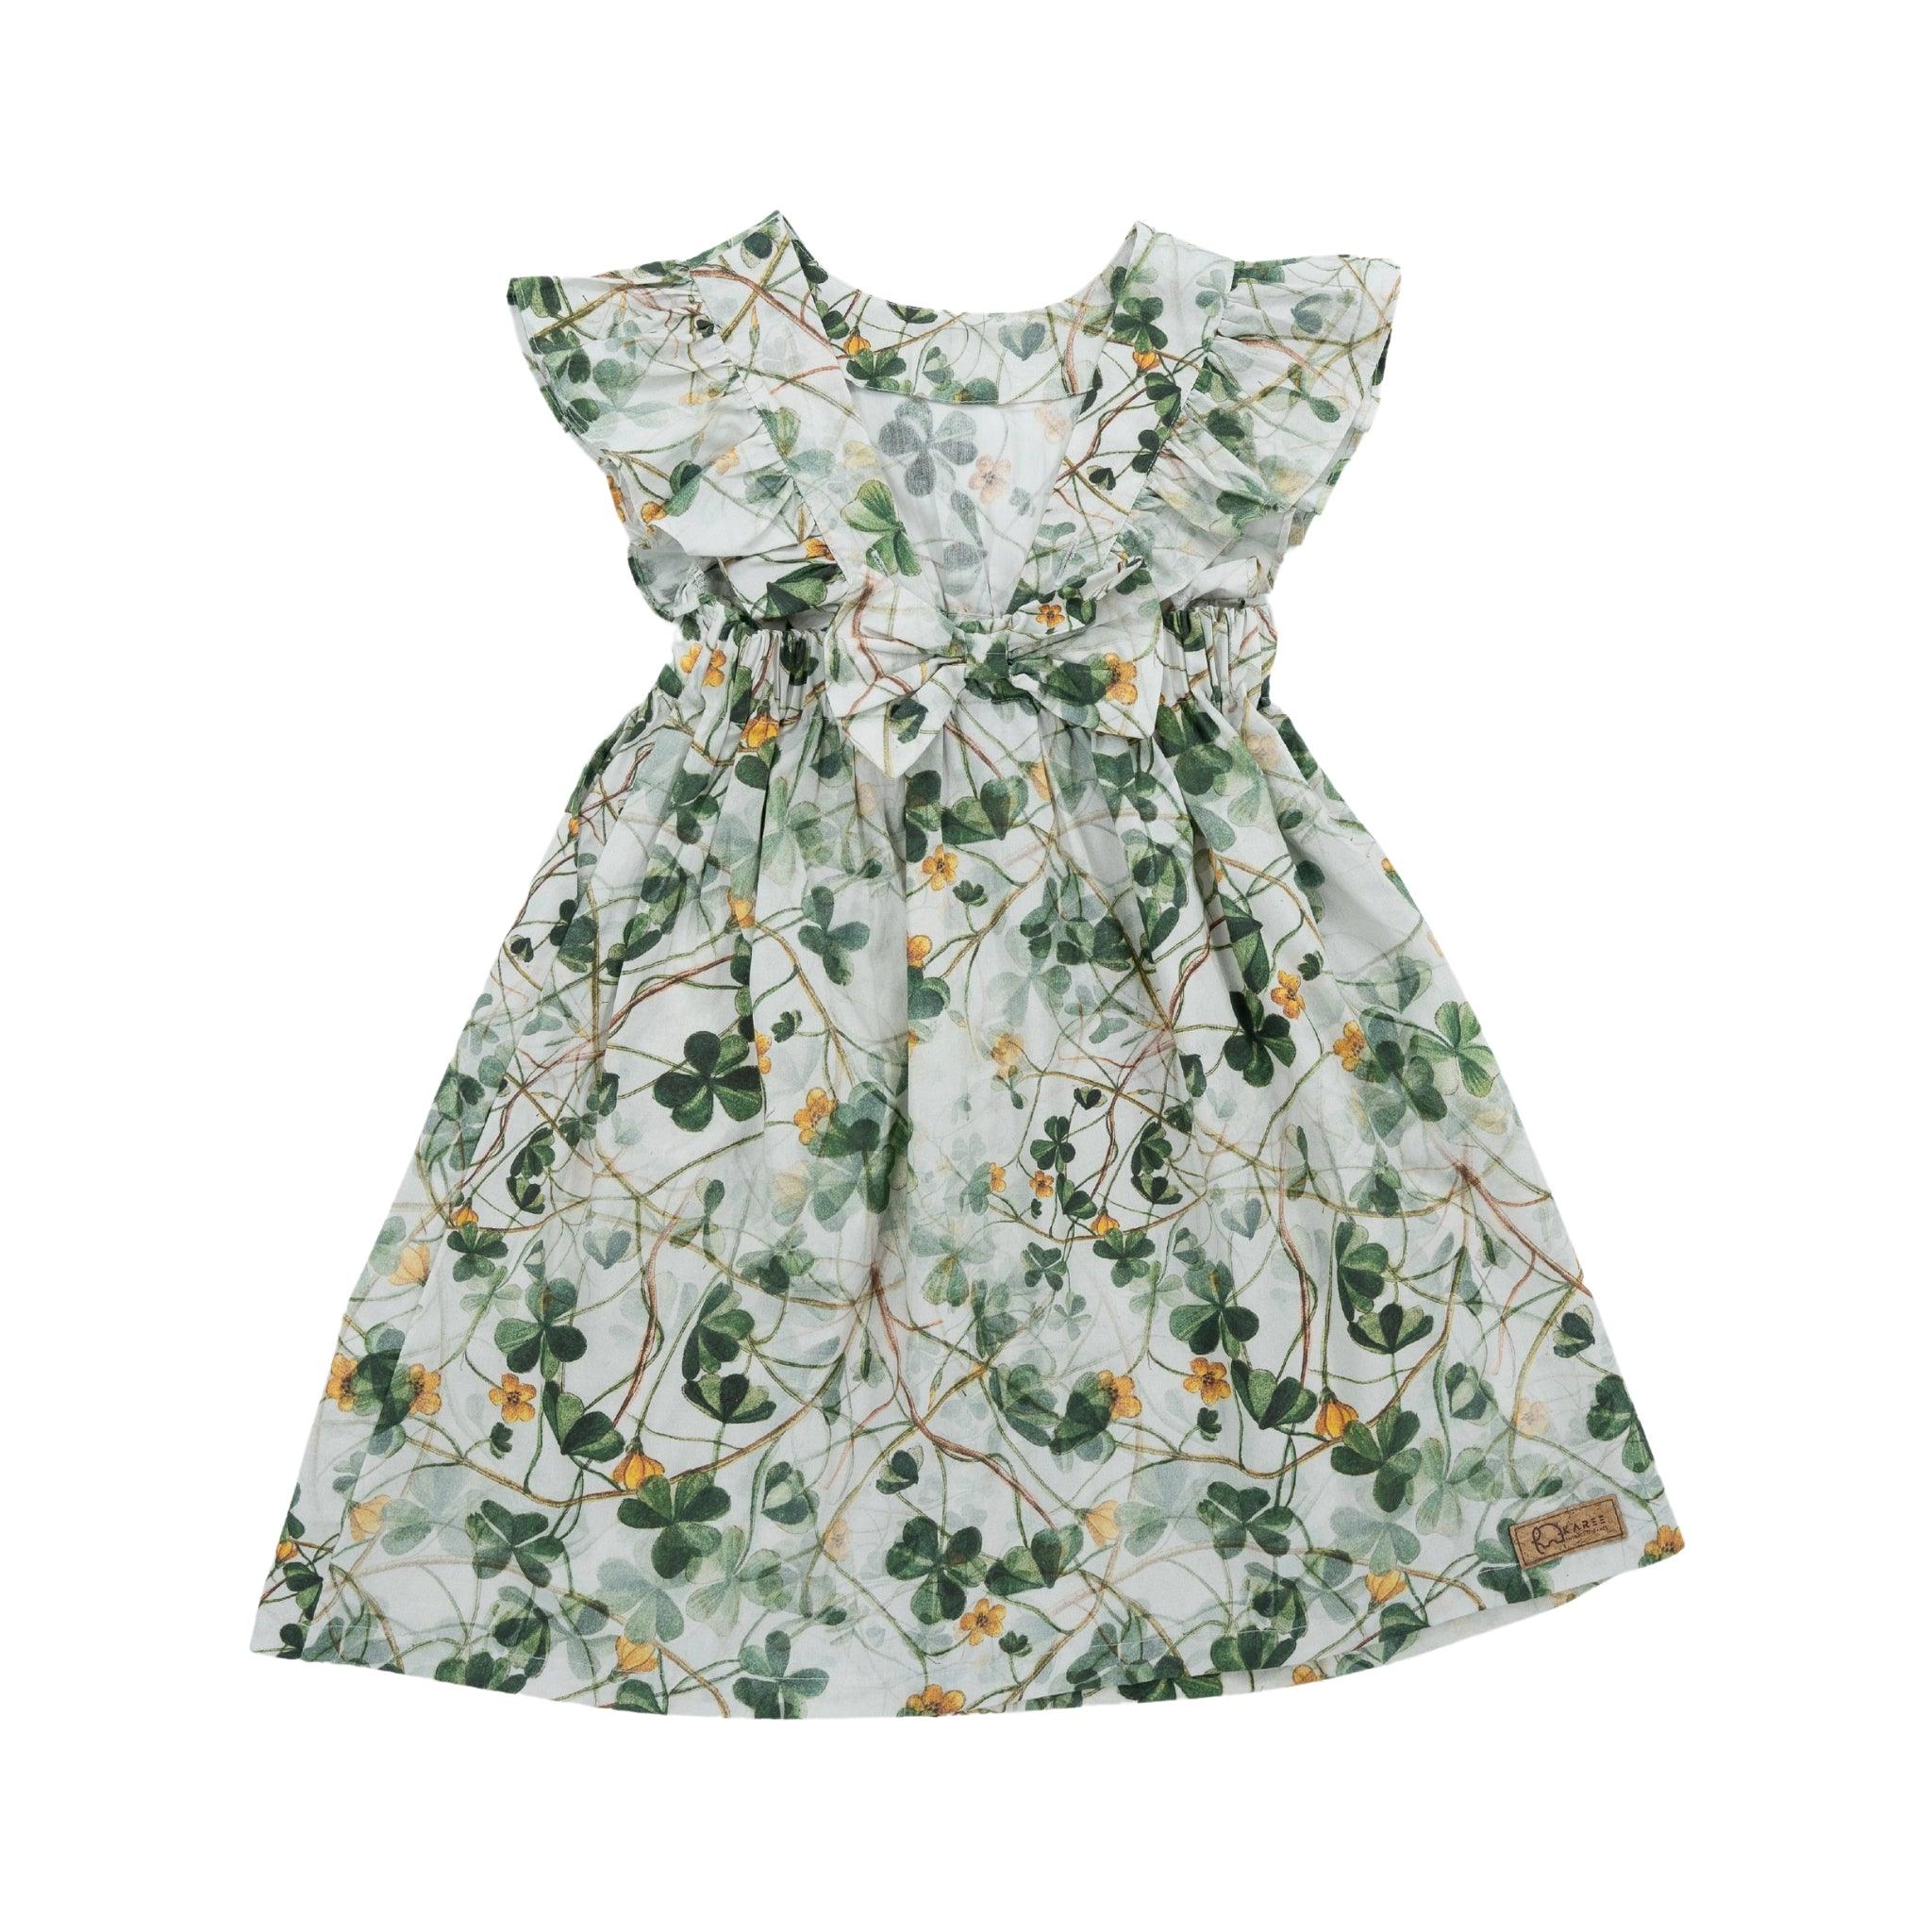 A Karee green floral cotton dress for girls with ruffled sleeves and a cinched waist, displayed against a white background.